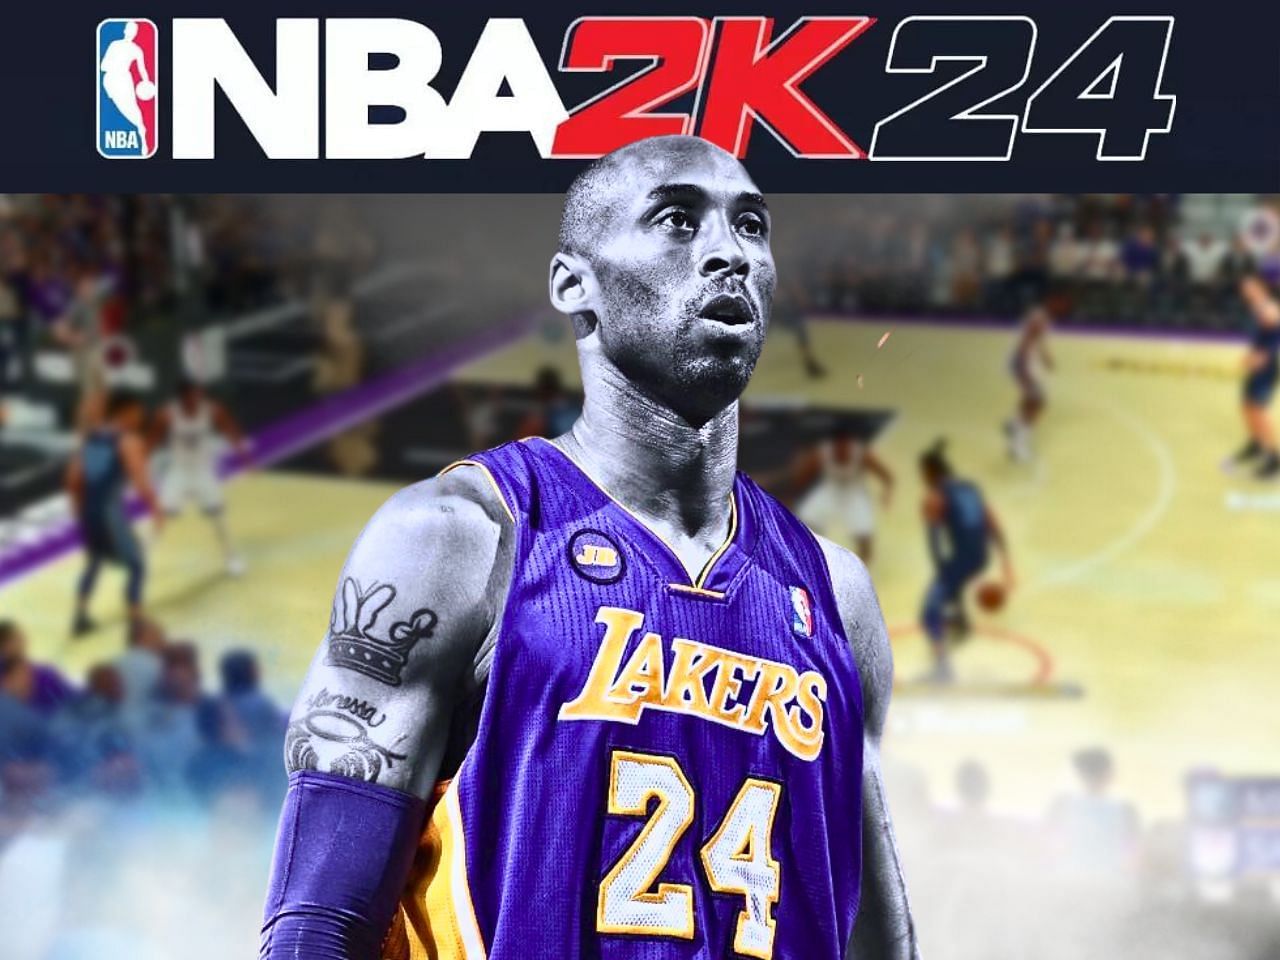 NBA 2k24 announces crossplay for all devices